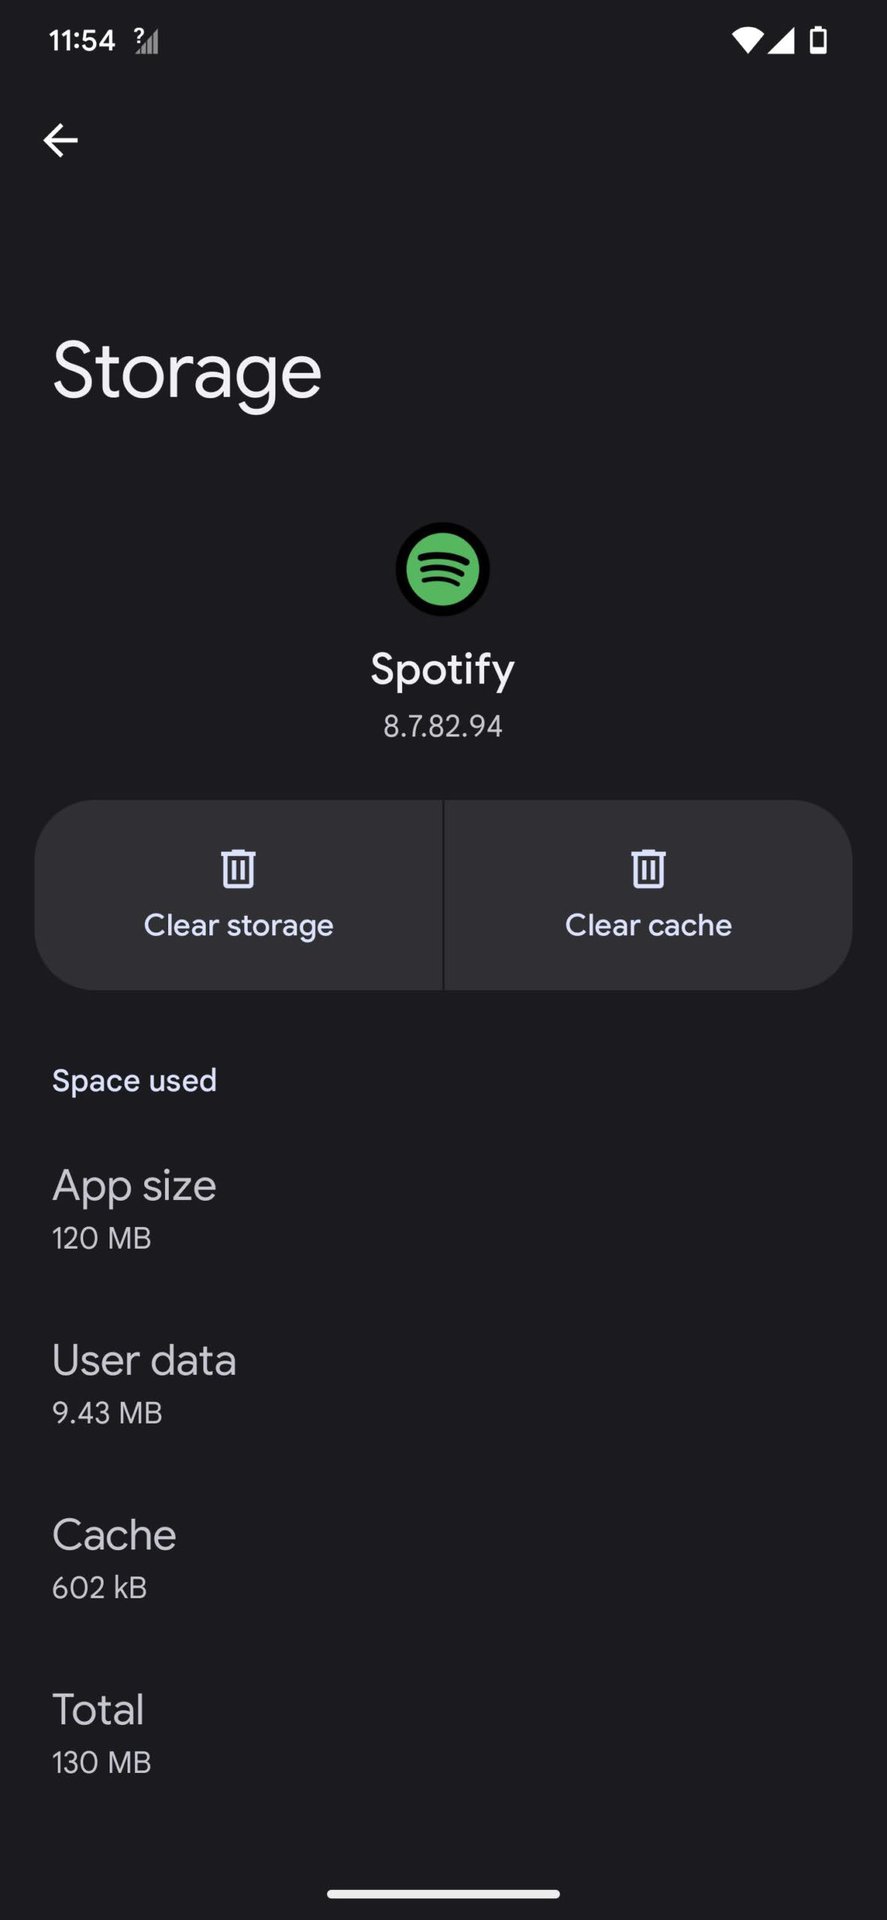 Clear cache on Spotify Android app 4